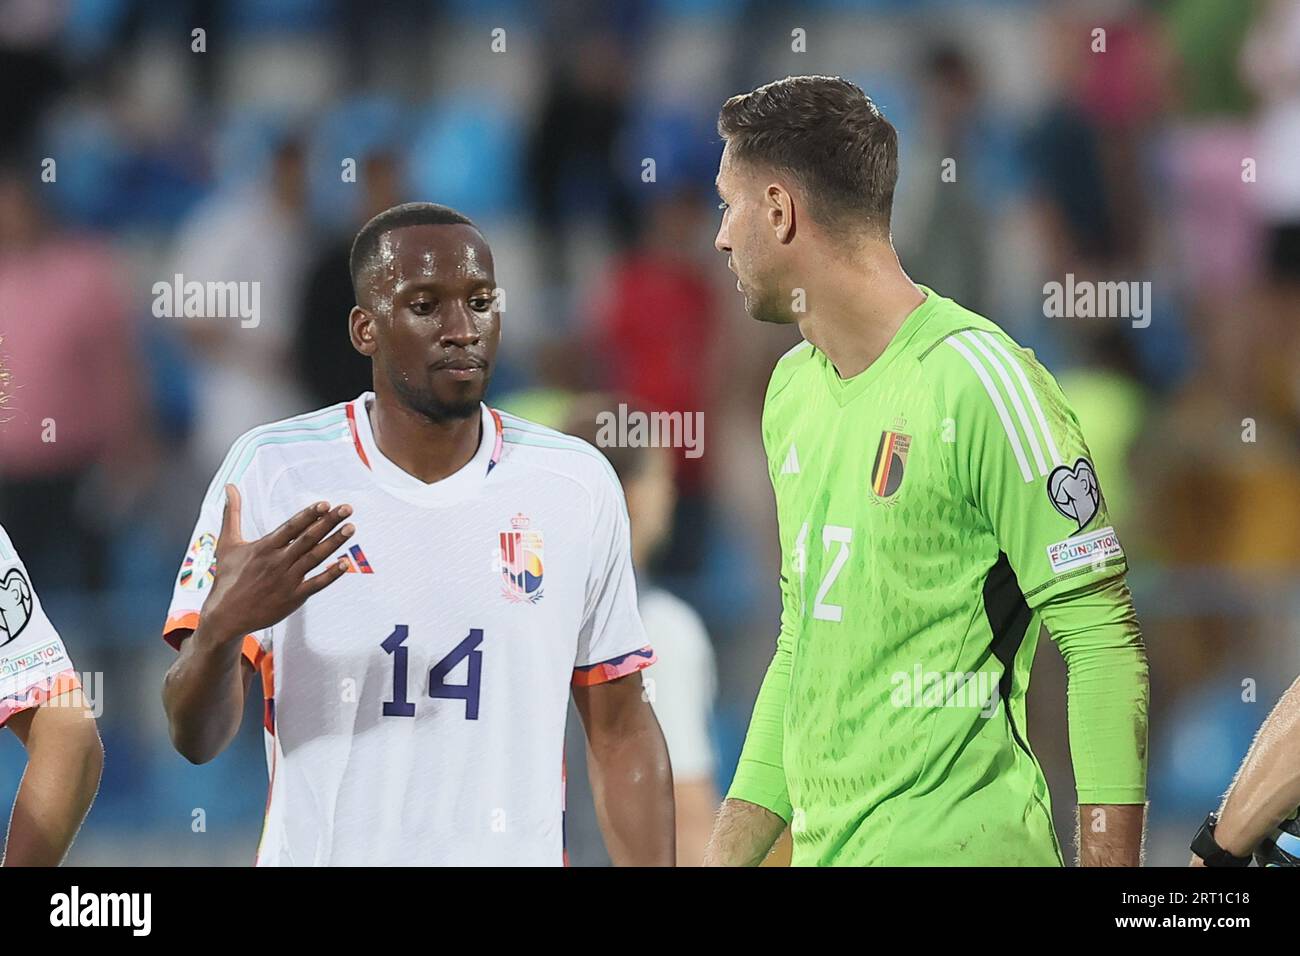 Belgium's Dodi Lukebakio and Belgium's goalkeeper Koen Casteels pictured after a game between Azerbaijan and the Belgian national soccer team Red Devils, in Baku, Azerbaijan, Saturday 09 September 2023, match 4/8 in Group F of the qualifications for the European Soccer Championships 2024. BELGA PHOTO BRUNO FAHY Stock Photo